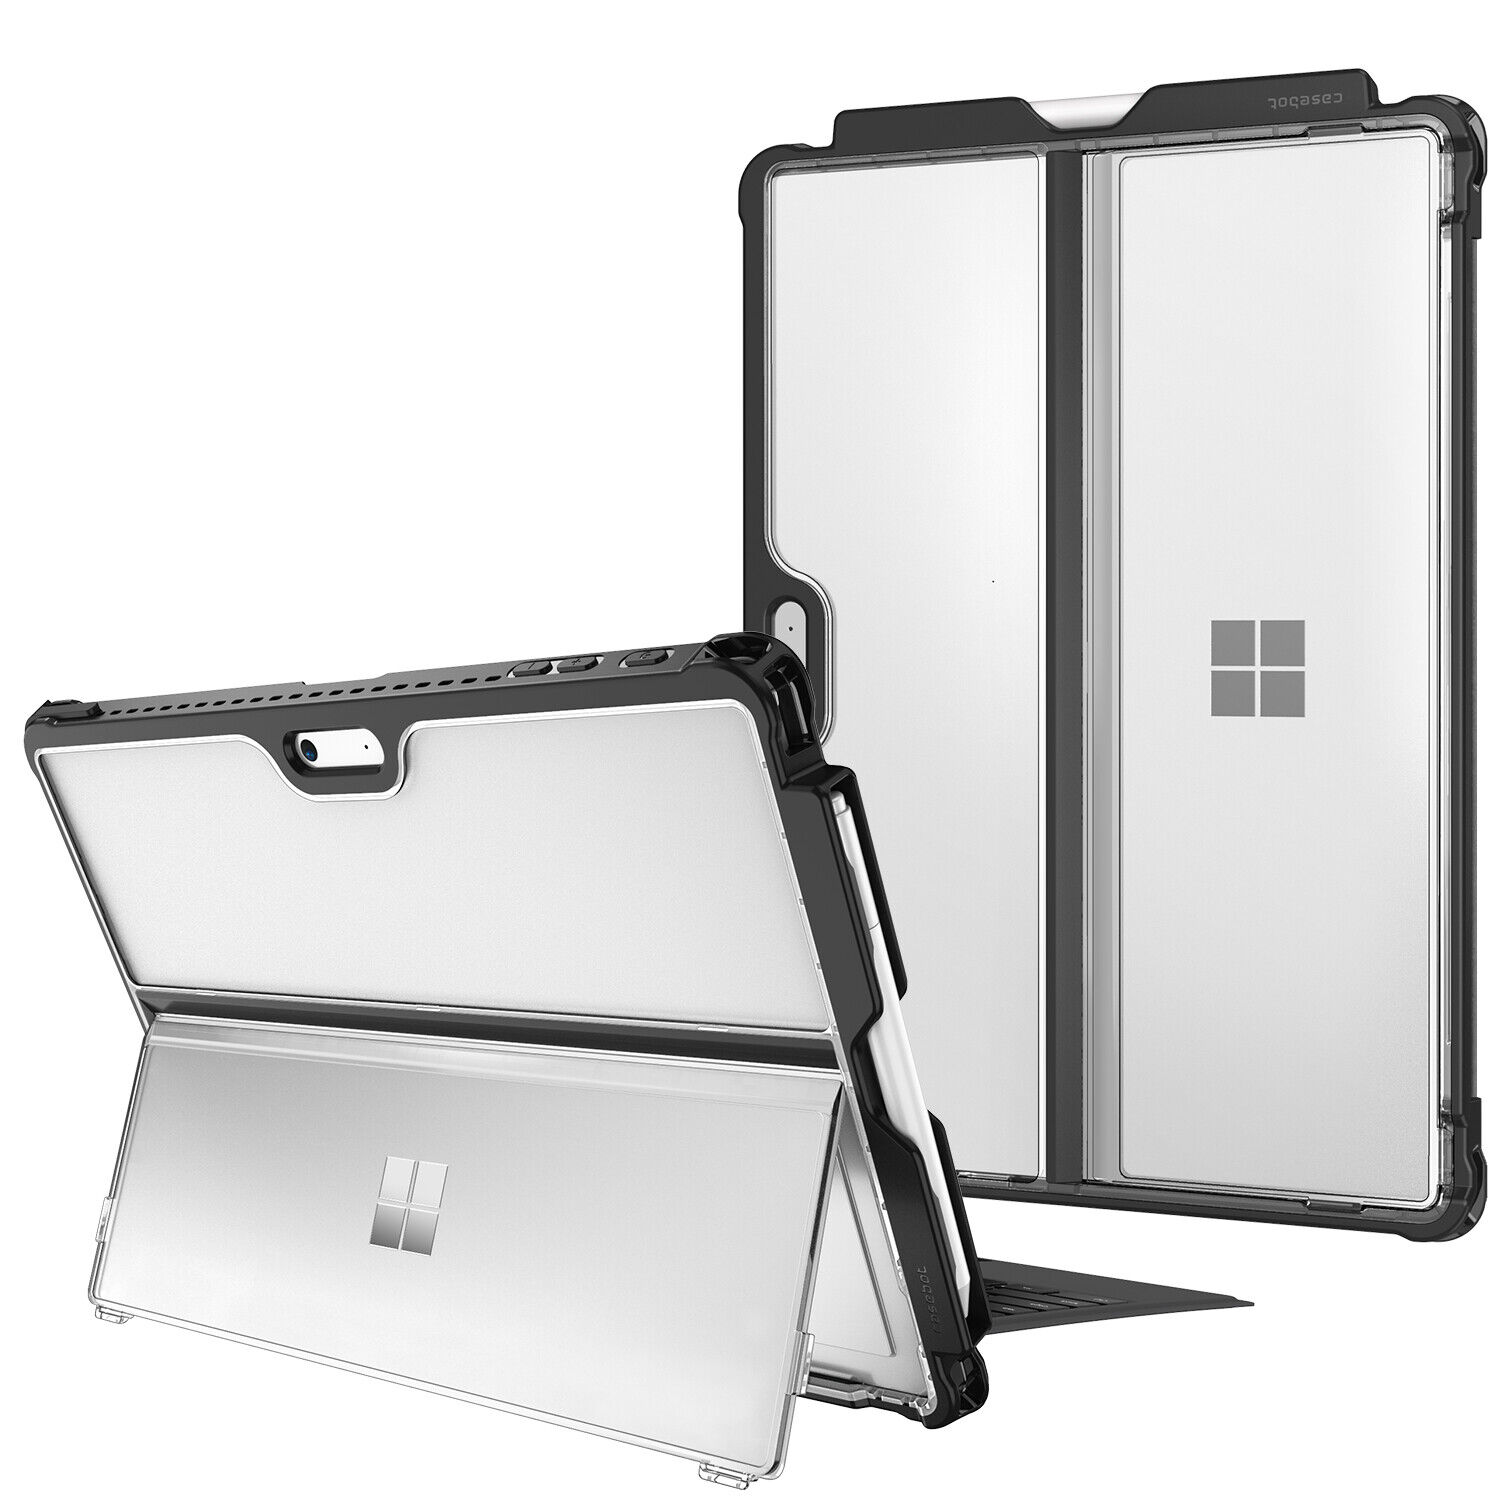 Case for Microsoft Surface Pro 7/ Pro 6/ Pro 5/ Pro LTE Shockproof Rugged Cover